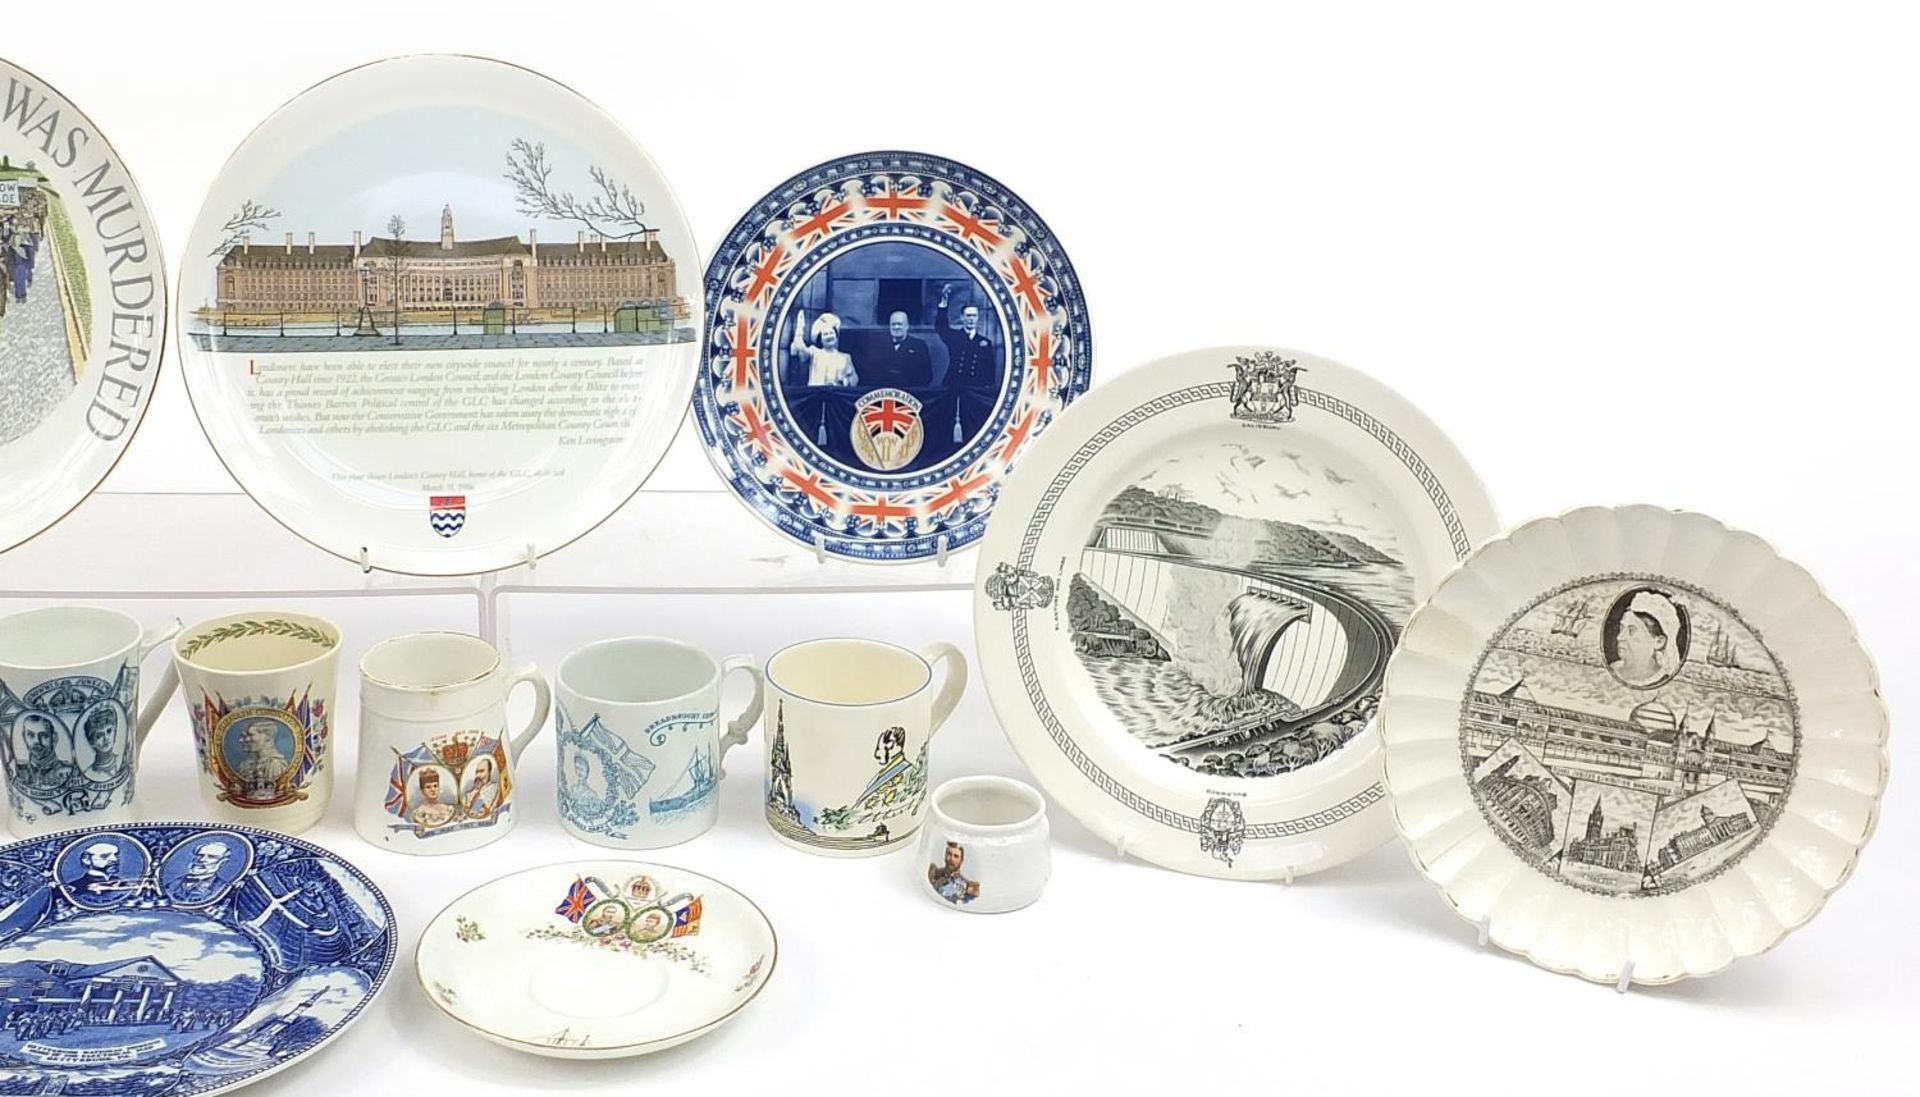 Victorian and later commemorative china including Prattware plate depicting Sebastopol, the - Image 3 of 4